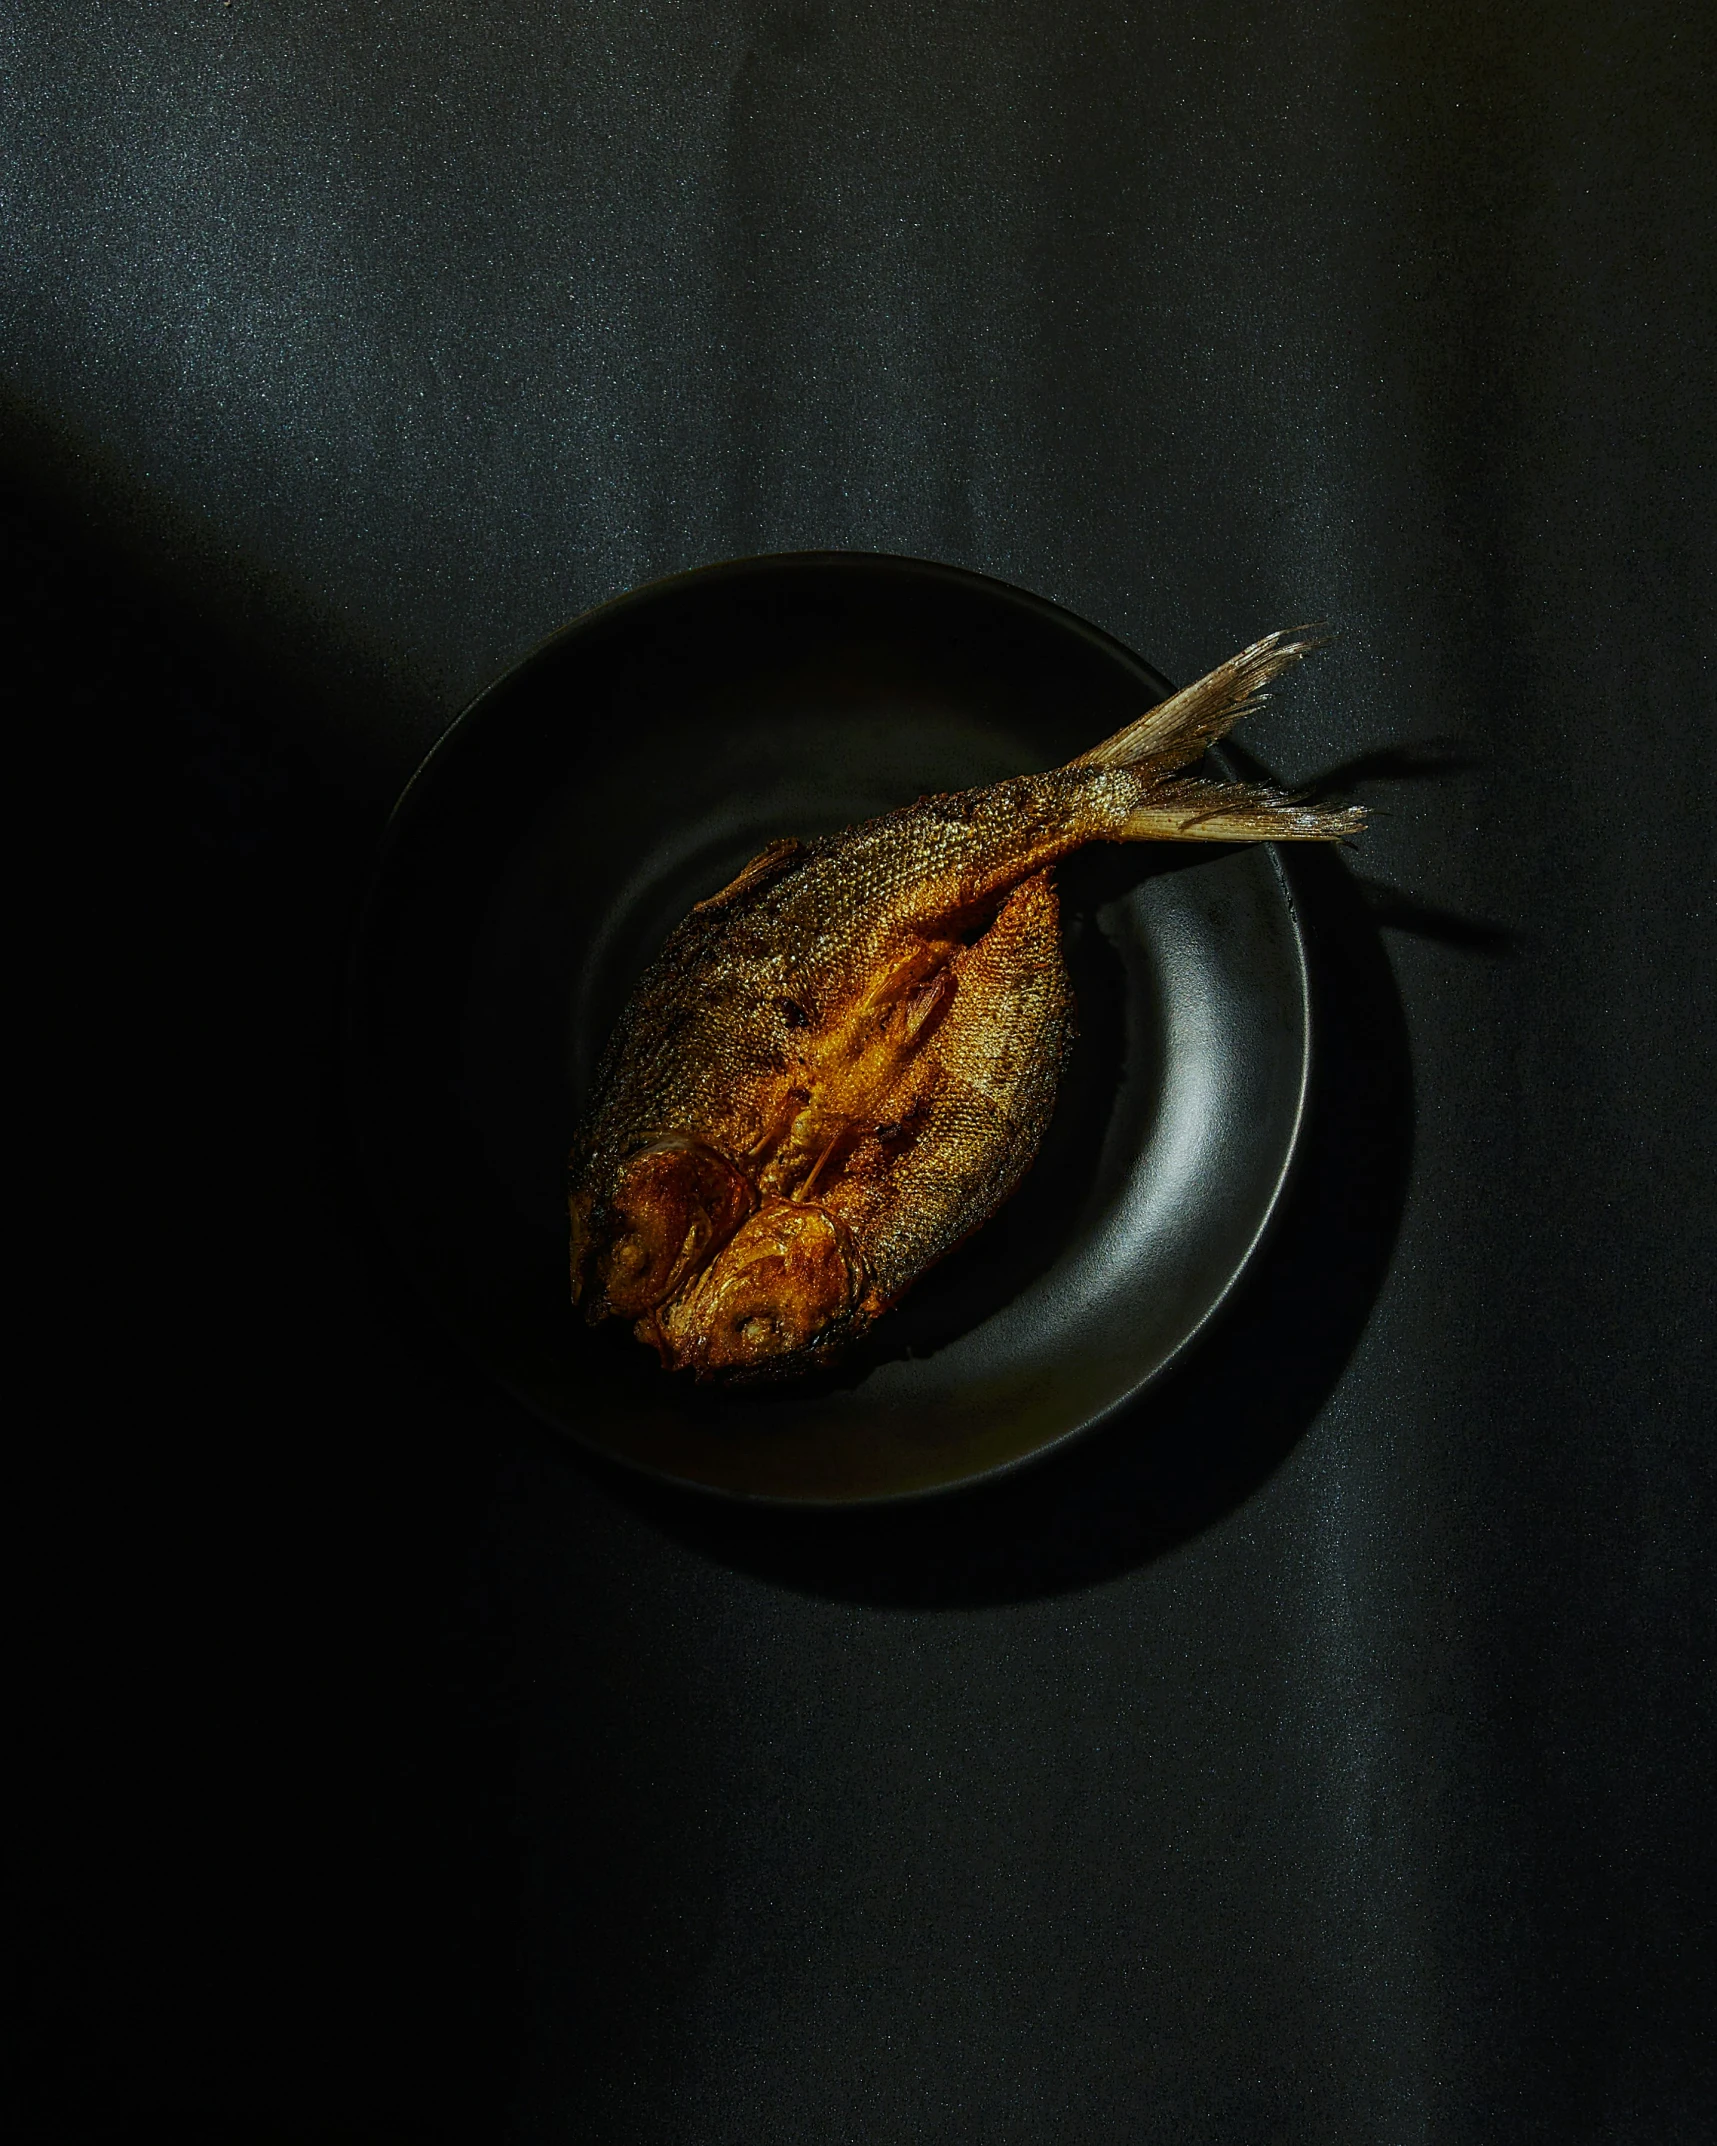 grilled food sits on a black plate against a dark background